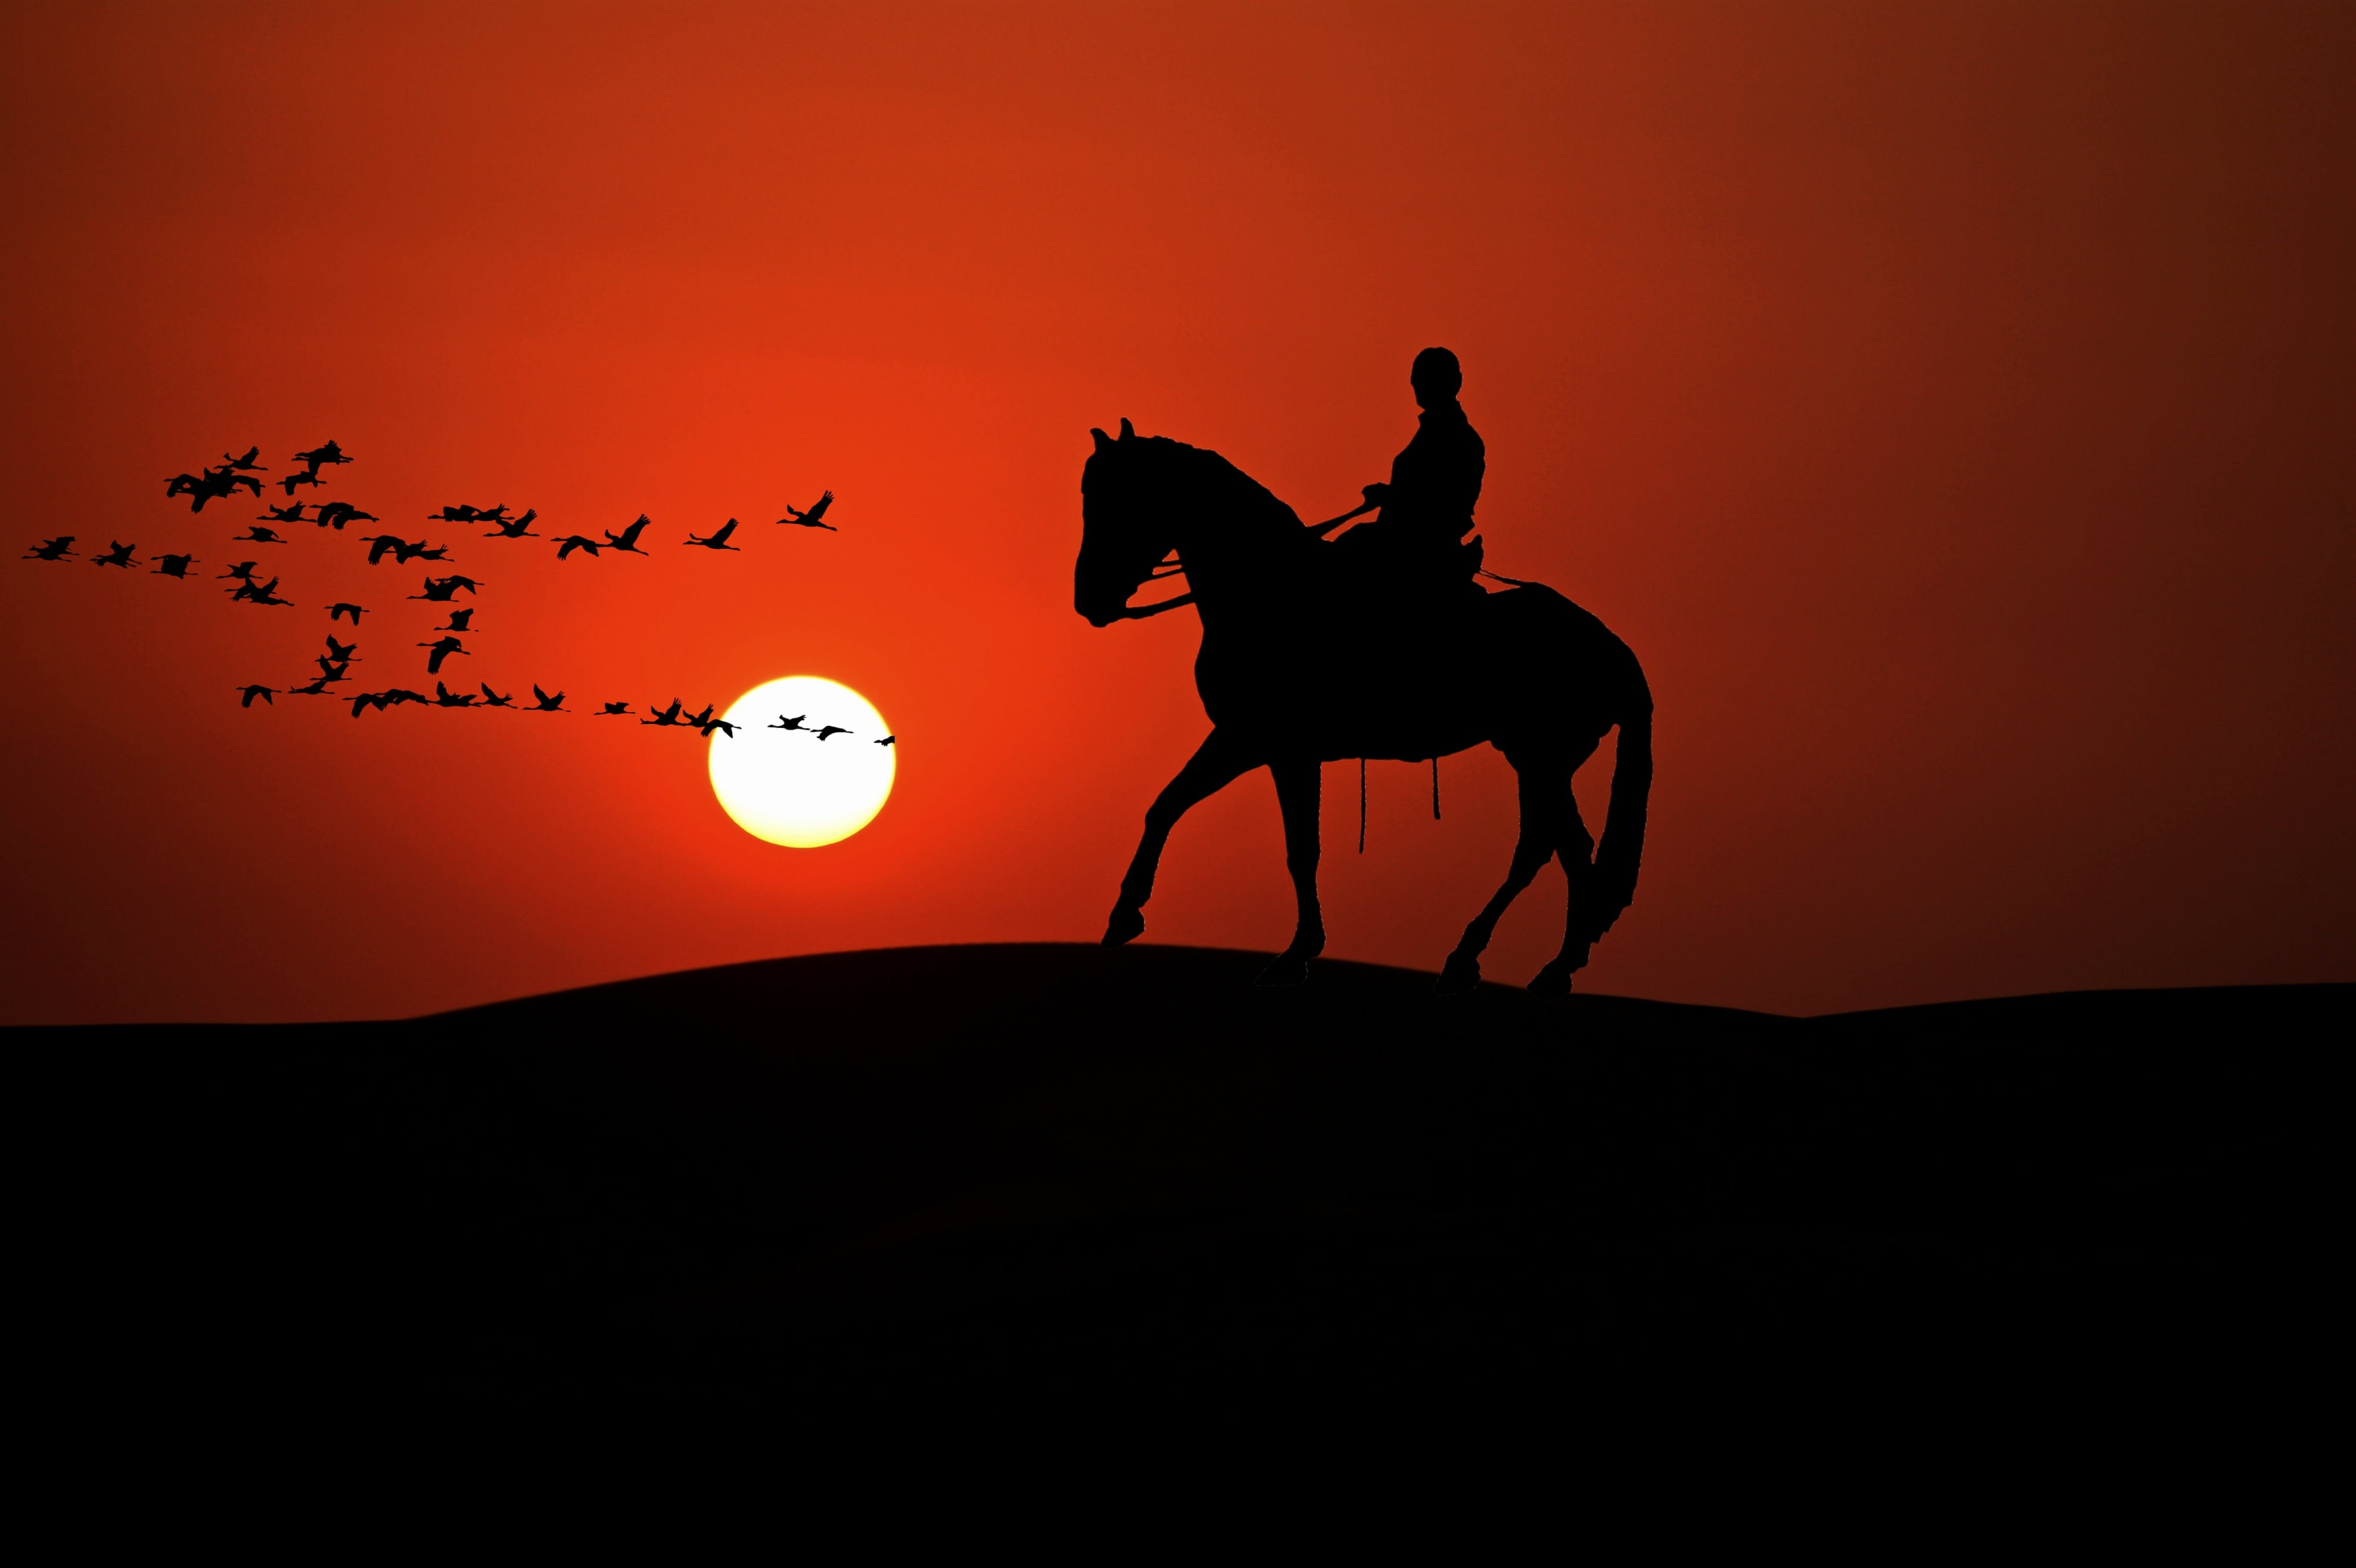 silhouette of person on horse and birds during golden hour, reiter